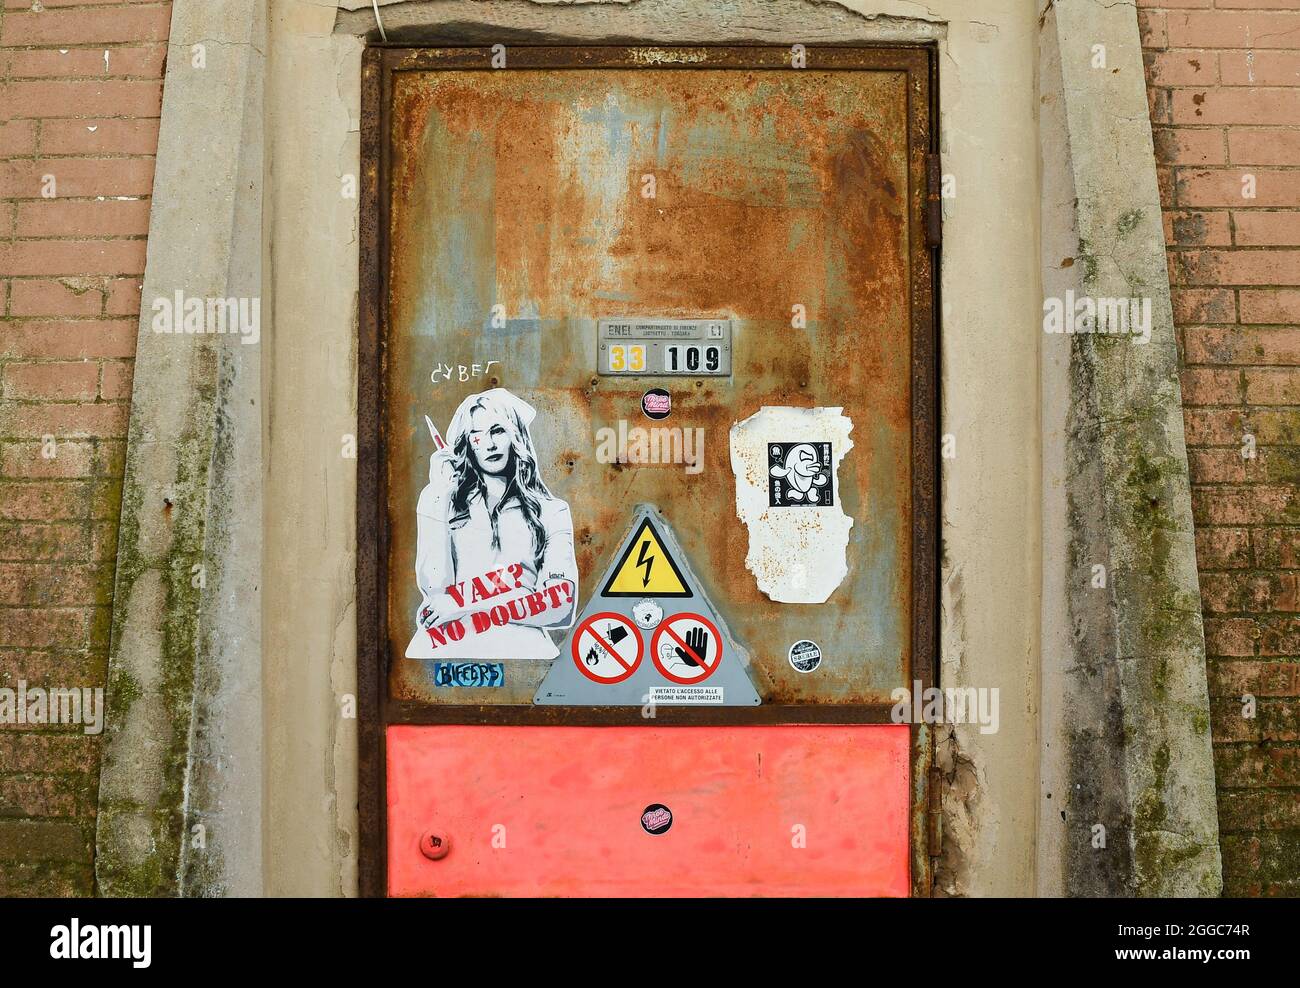 Rusty door of an old power station with the paste-up artwork 'Vax? No doubt!' by street artist Laben and a little sticker by Merioone, Livorno, Italy Stock Photo